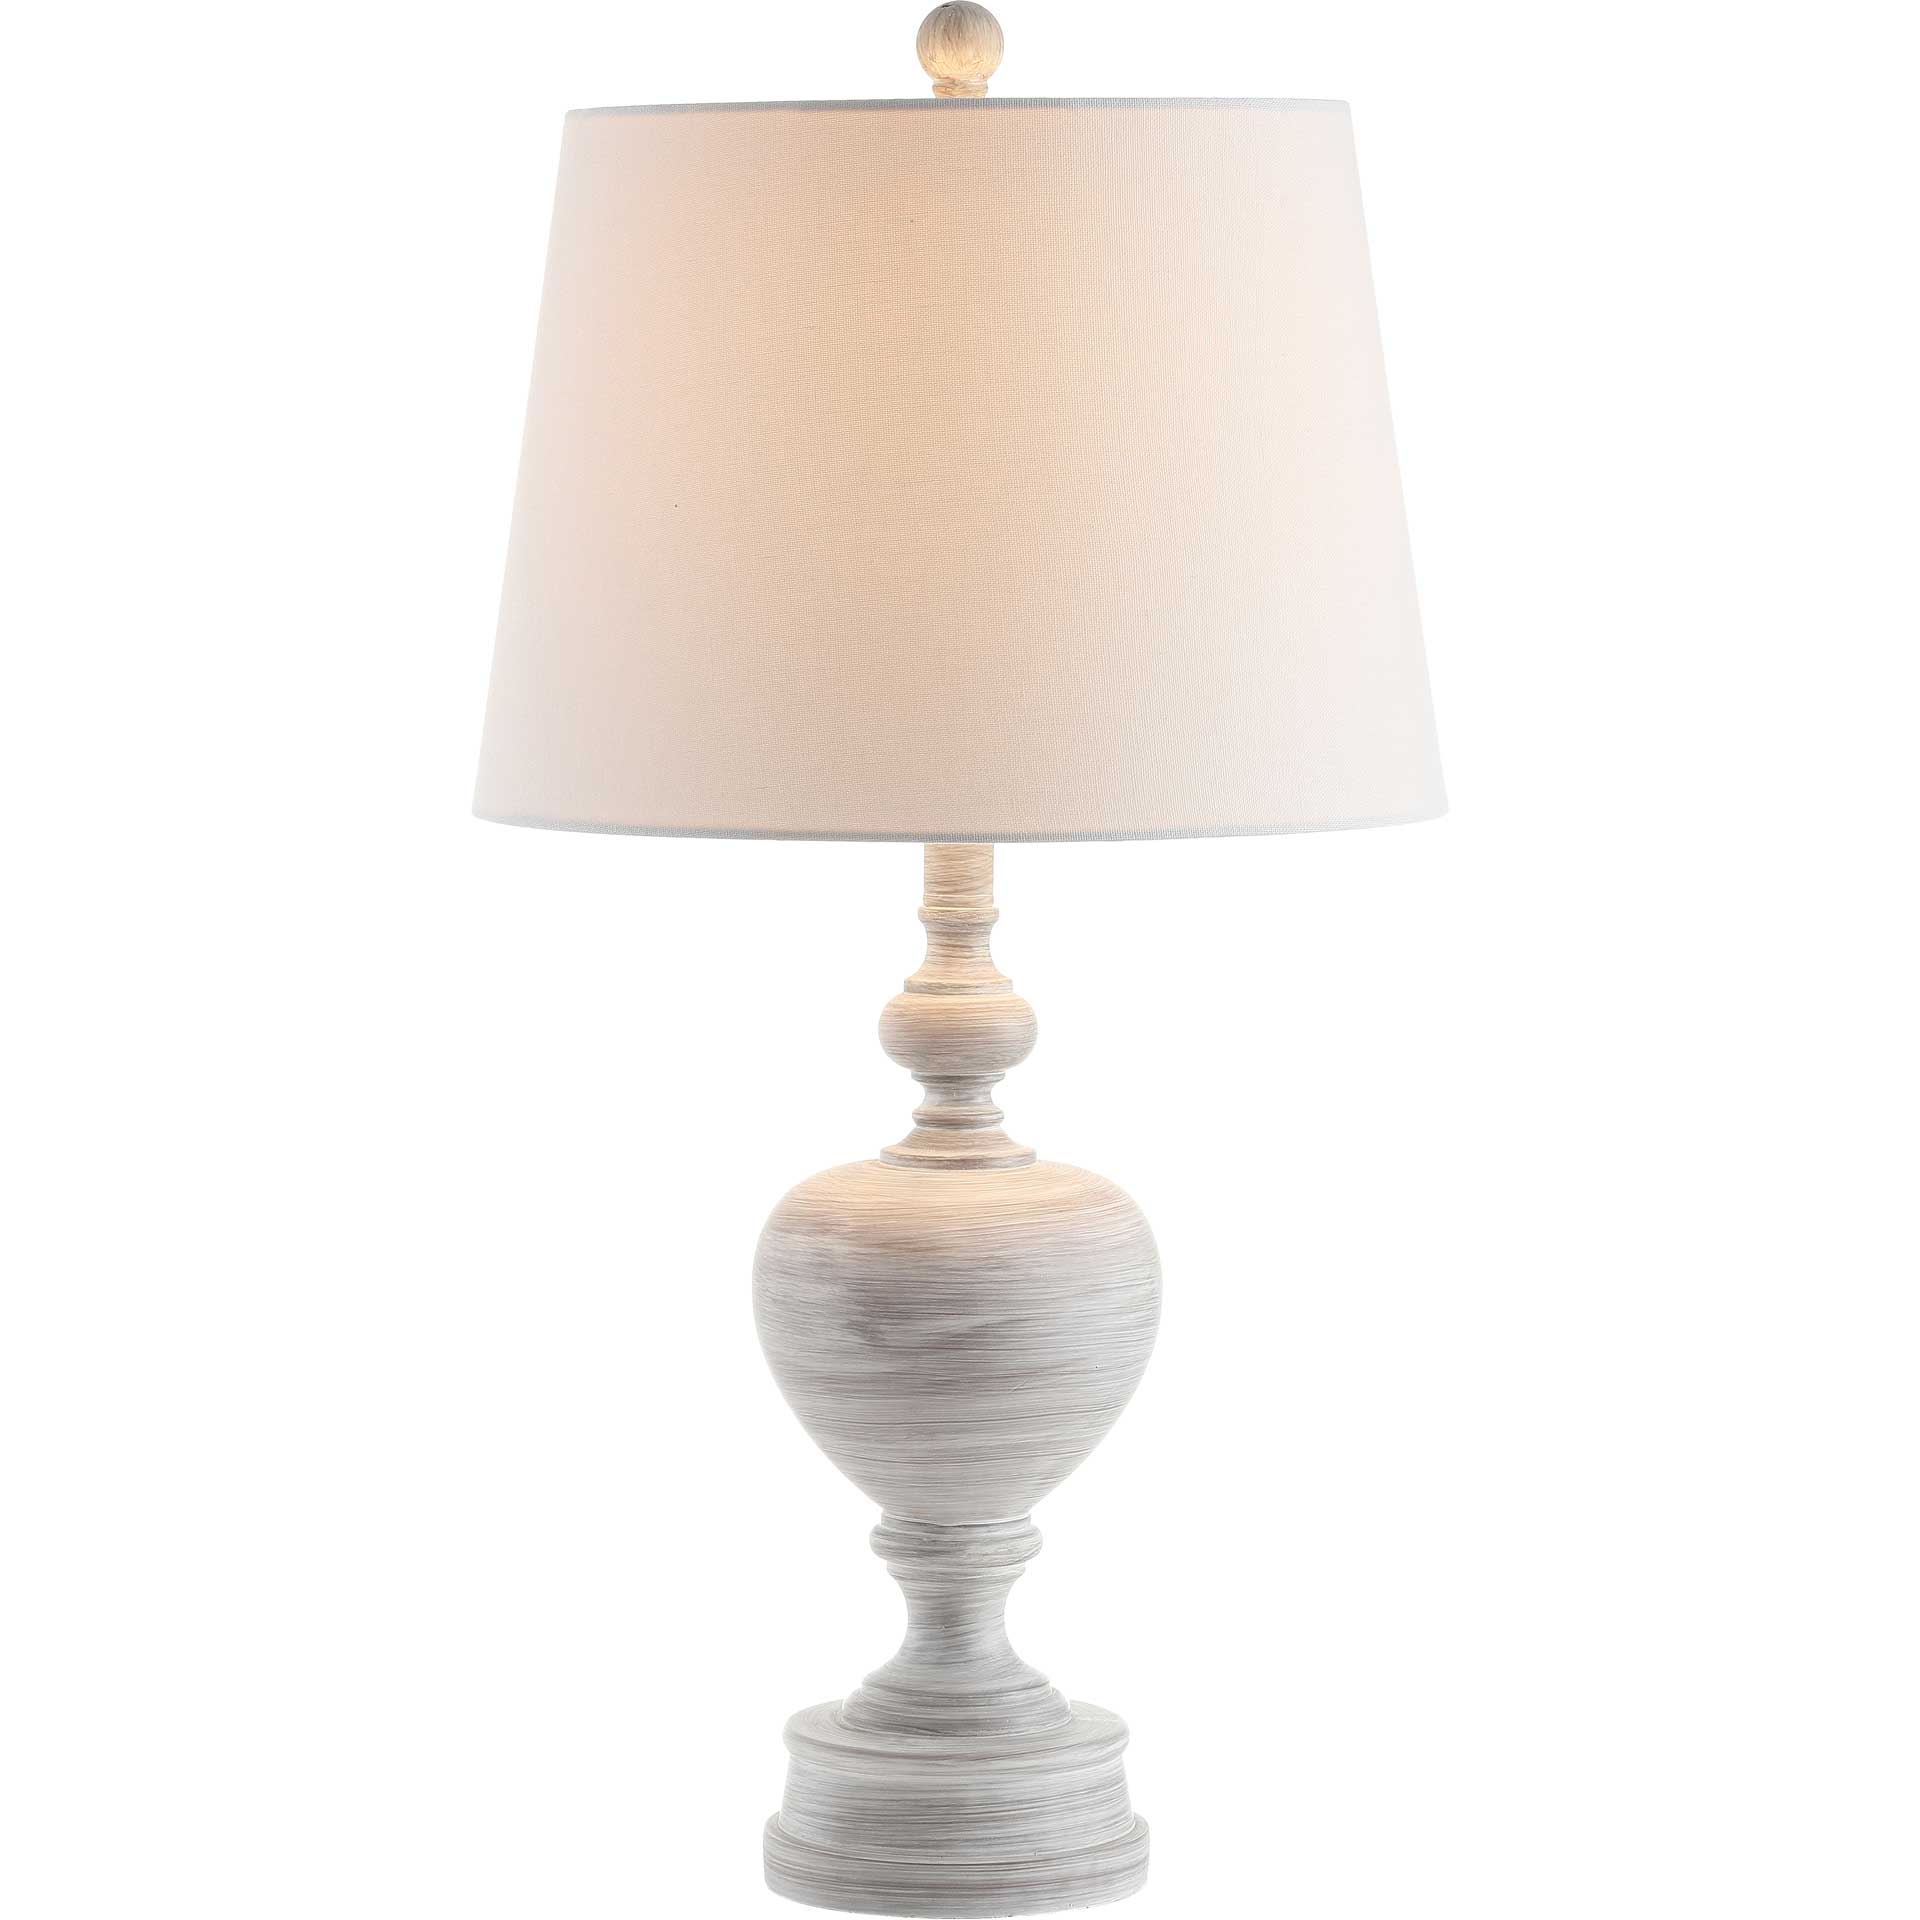 Allegory Table Lamp Wash White (Set of 2)